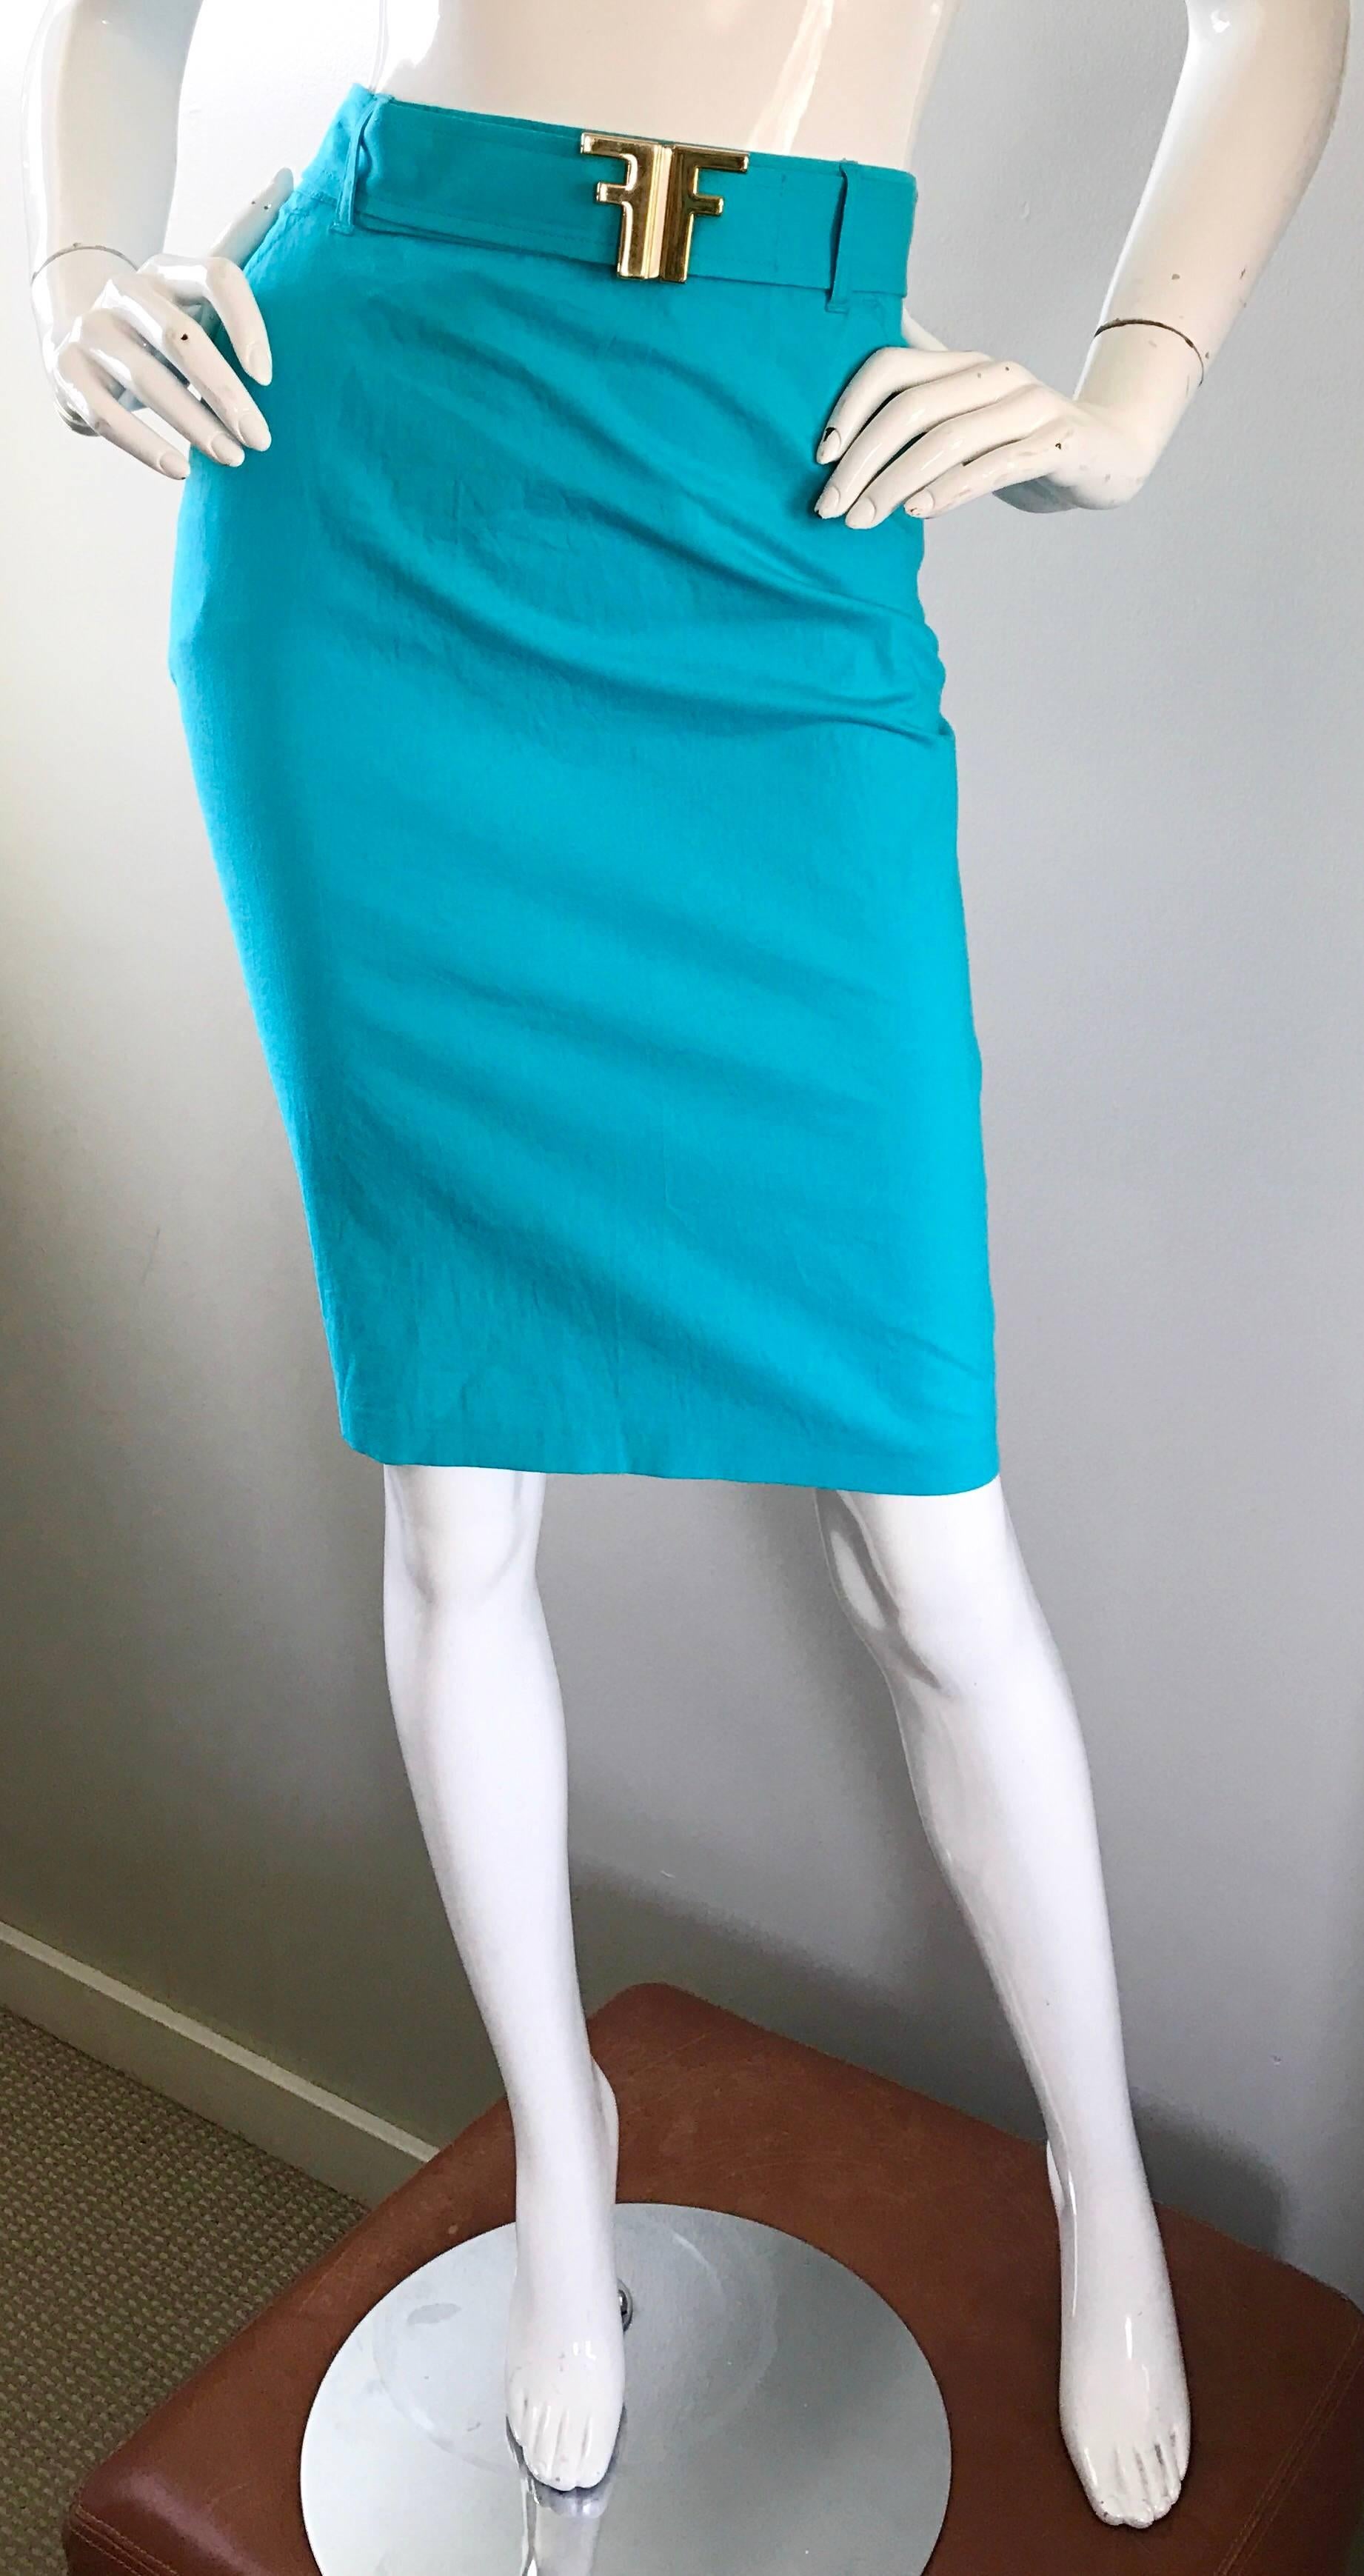 1990s Fendi By Karl Lagerfeld Vintage Turquoise Teal Blue Cotton Skirt w FF Belt For Sale 2